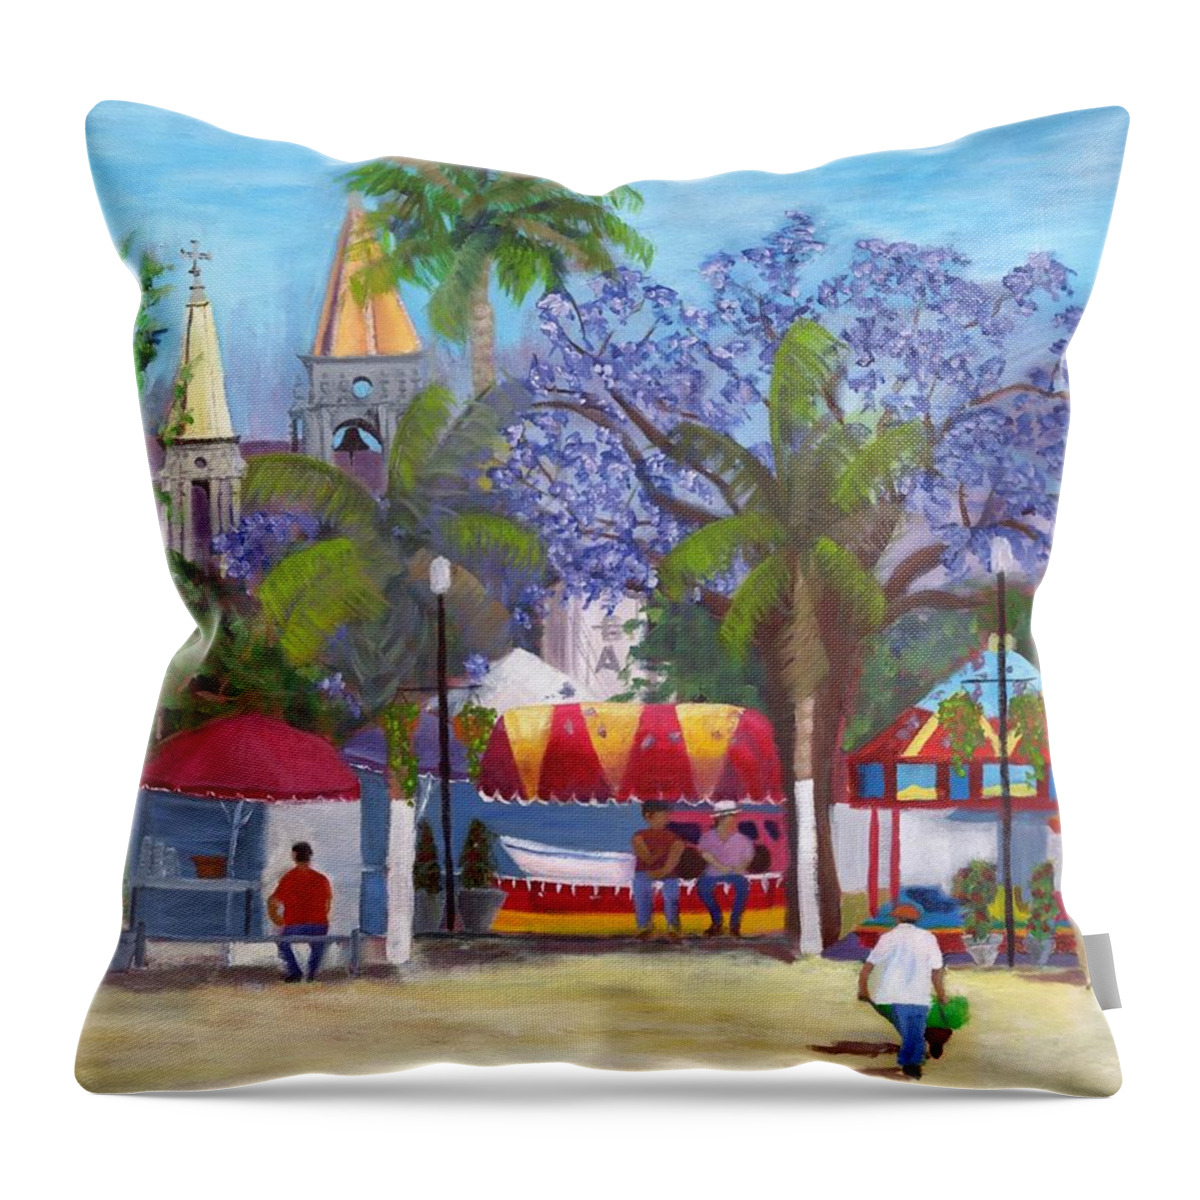 Chapala Throw Pillow featuring the painting Chapala Malecon by Glenda Rogers